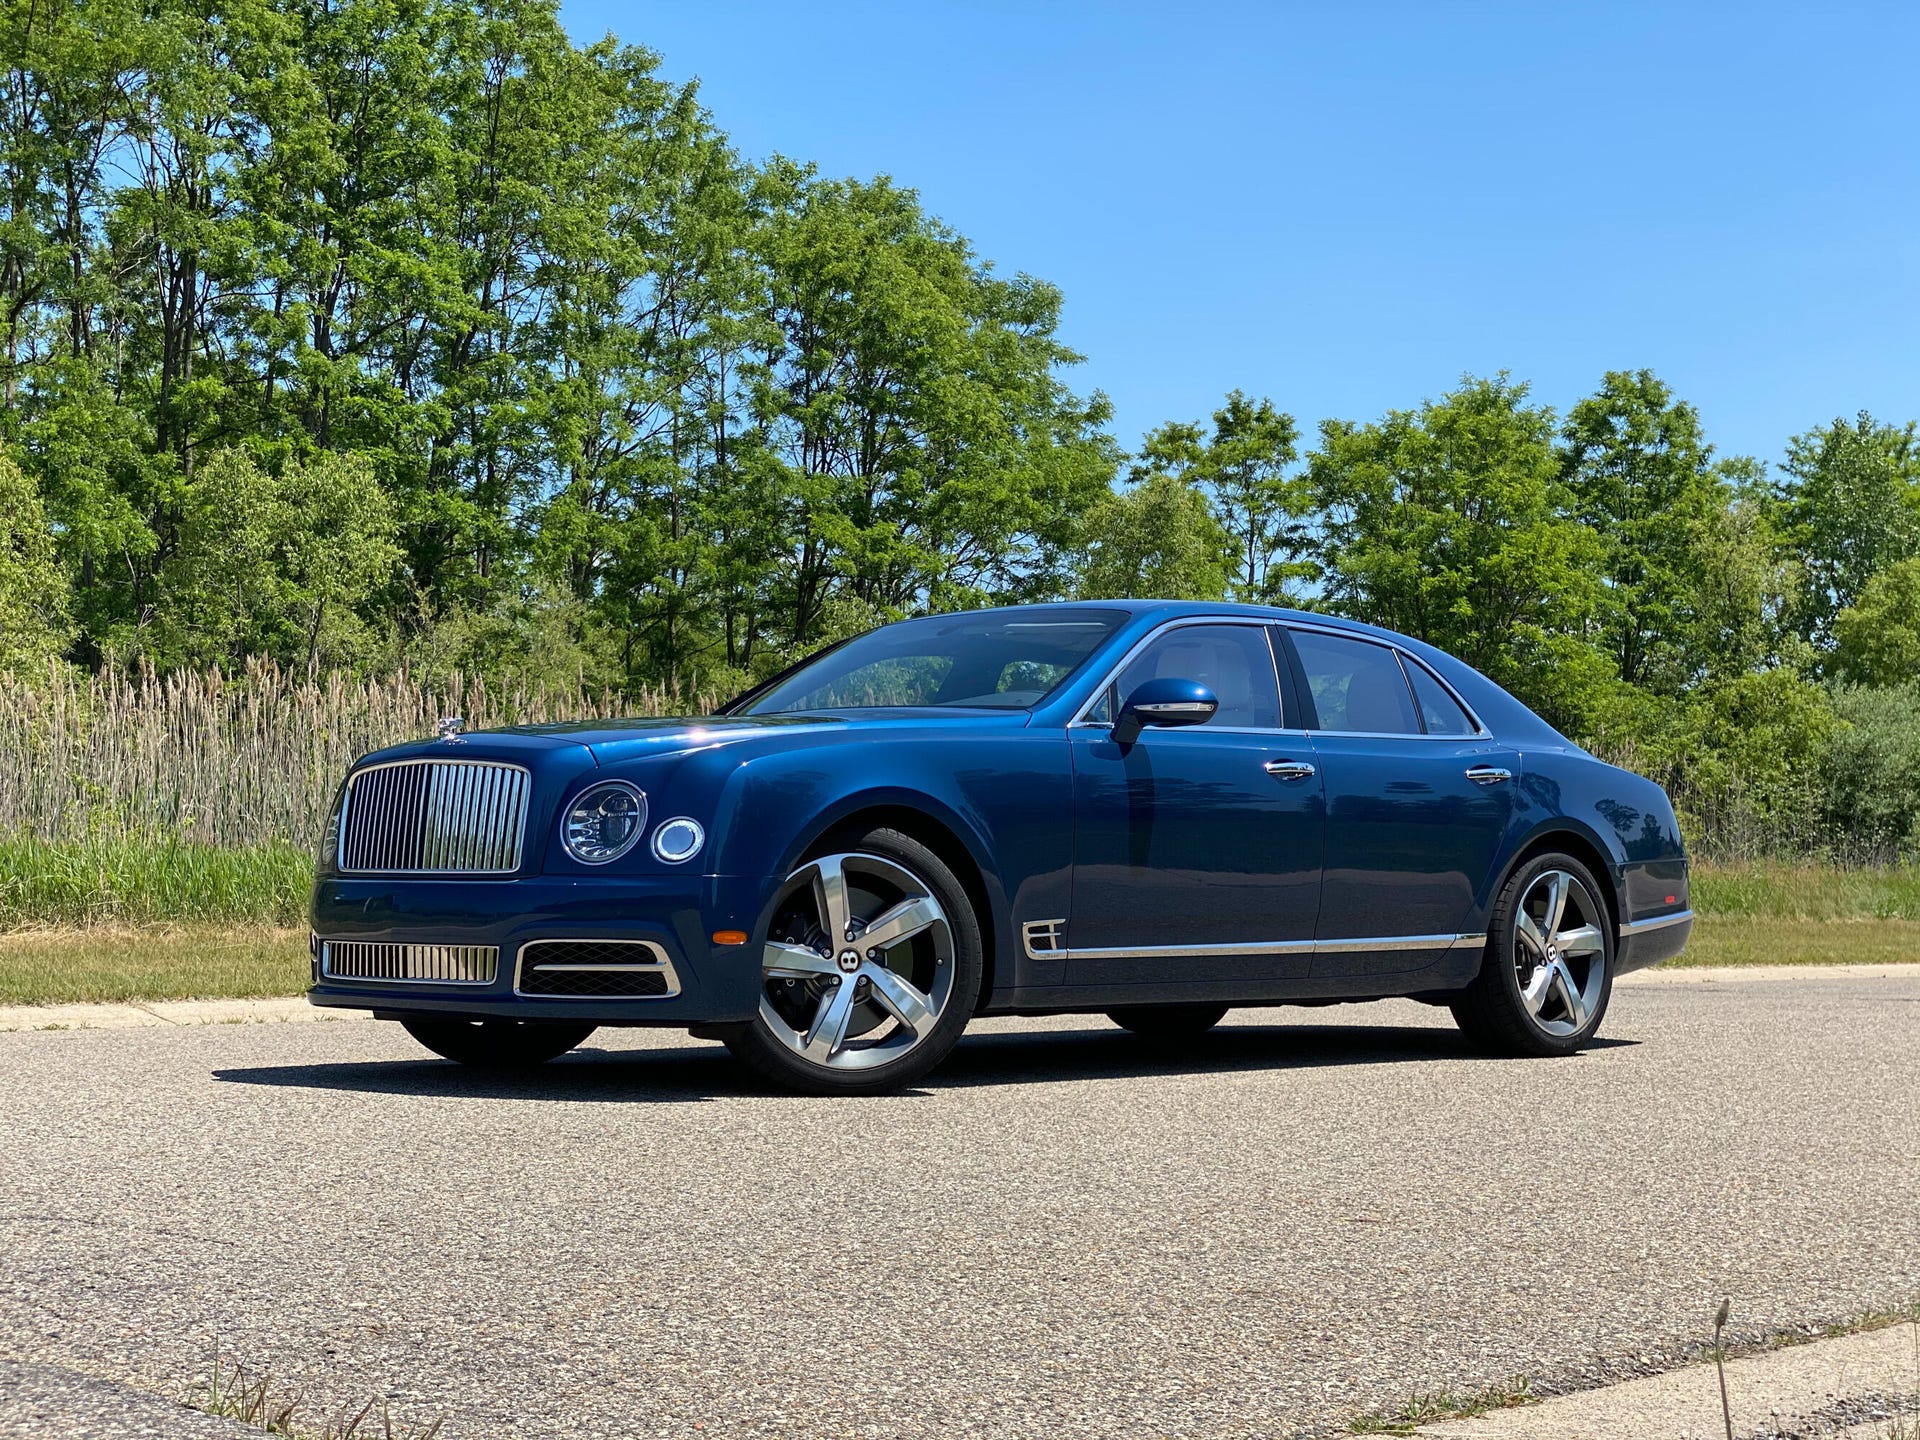 Requiem for a heavyweight: Saying goodbye to the Bentley Mulsanne and its  6.75L V8 - CNET